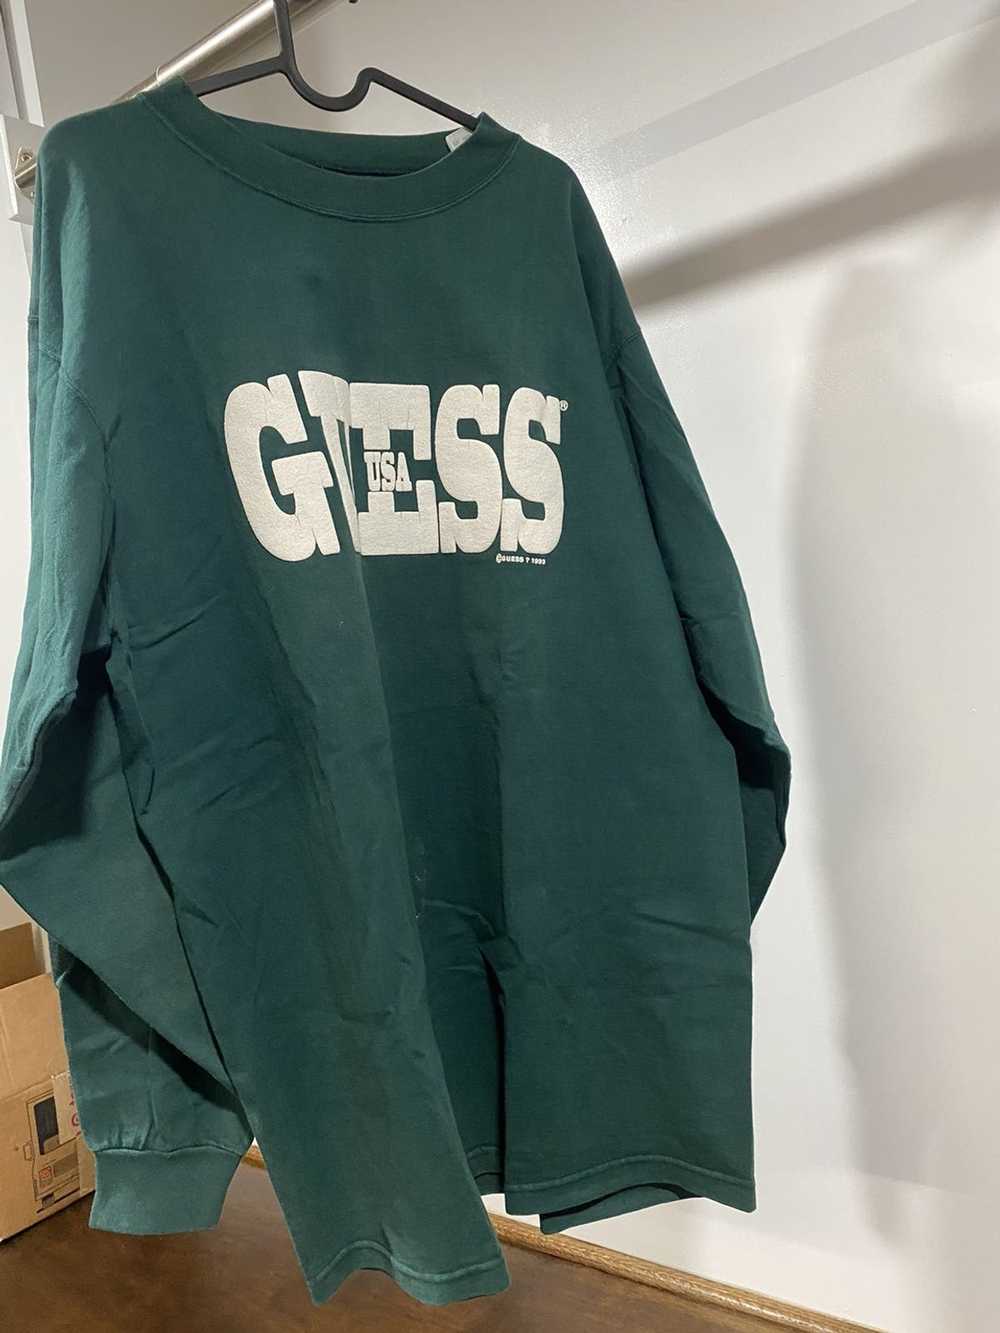 Guess Guess Vintage tee - image 2